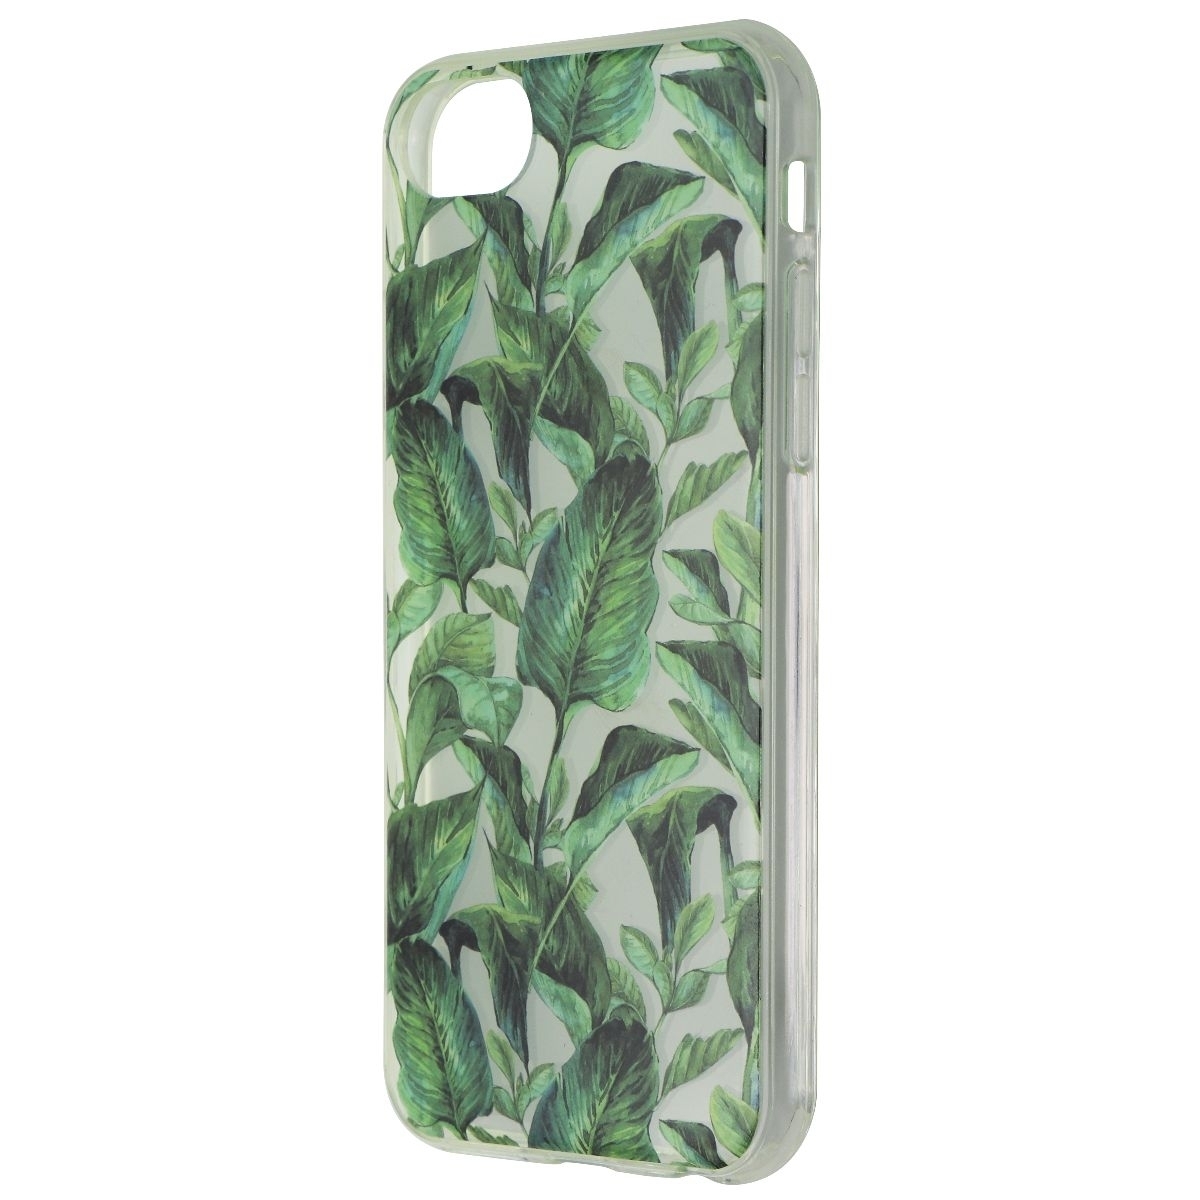 StrongnFree Hard Case For Apple IPhone 7/6s/6 - Clear/Green Leaves (Refurbished)